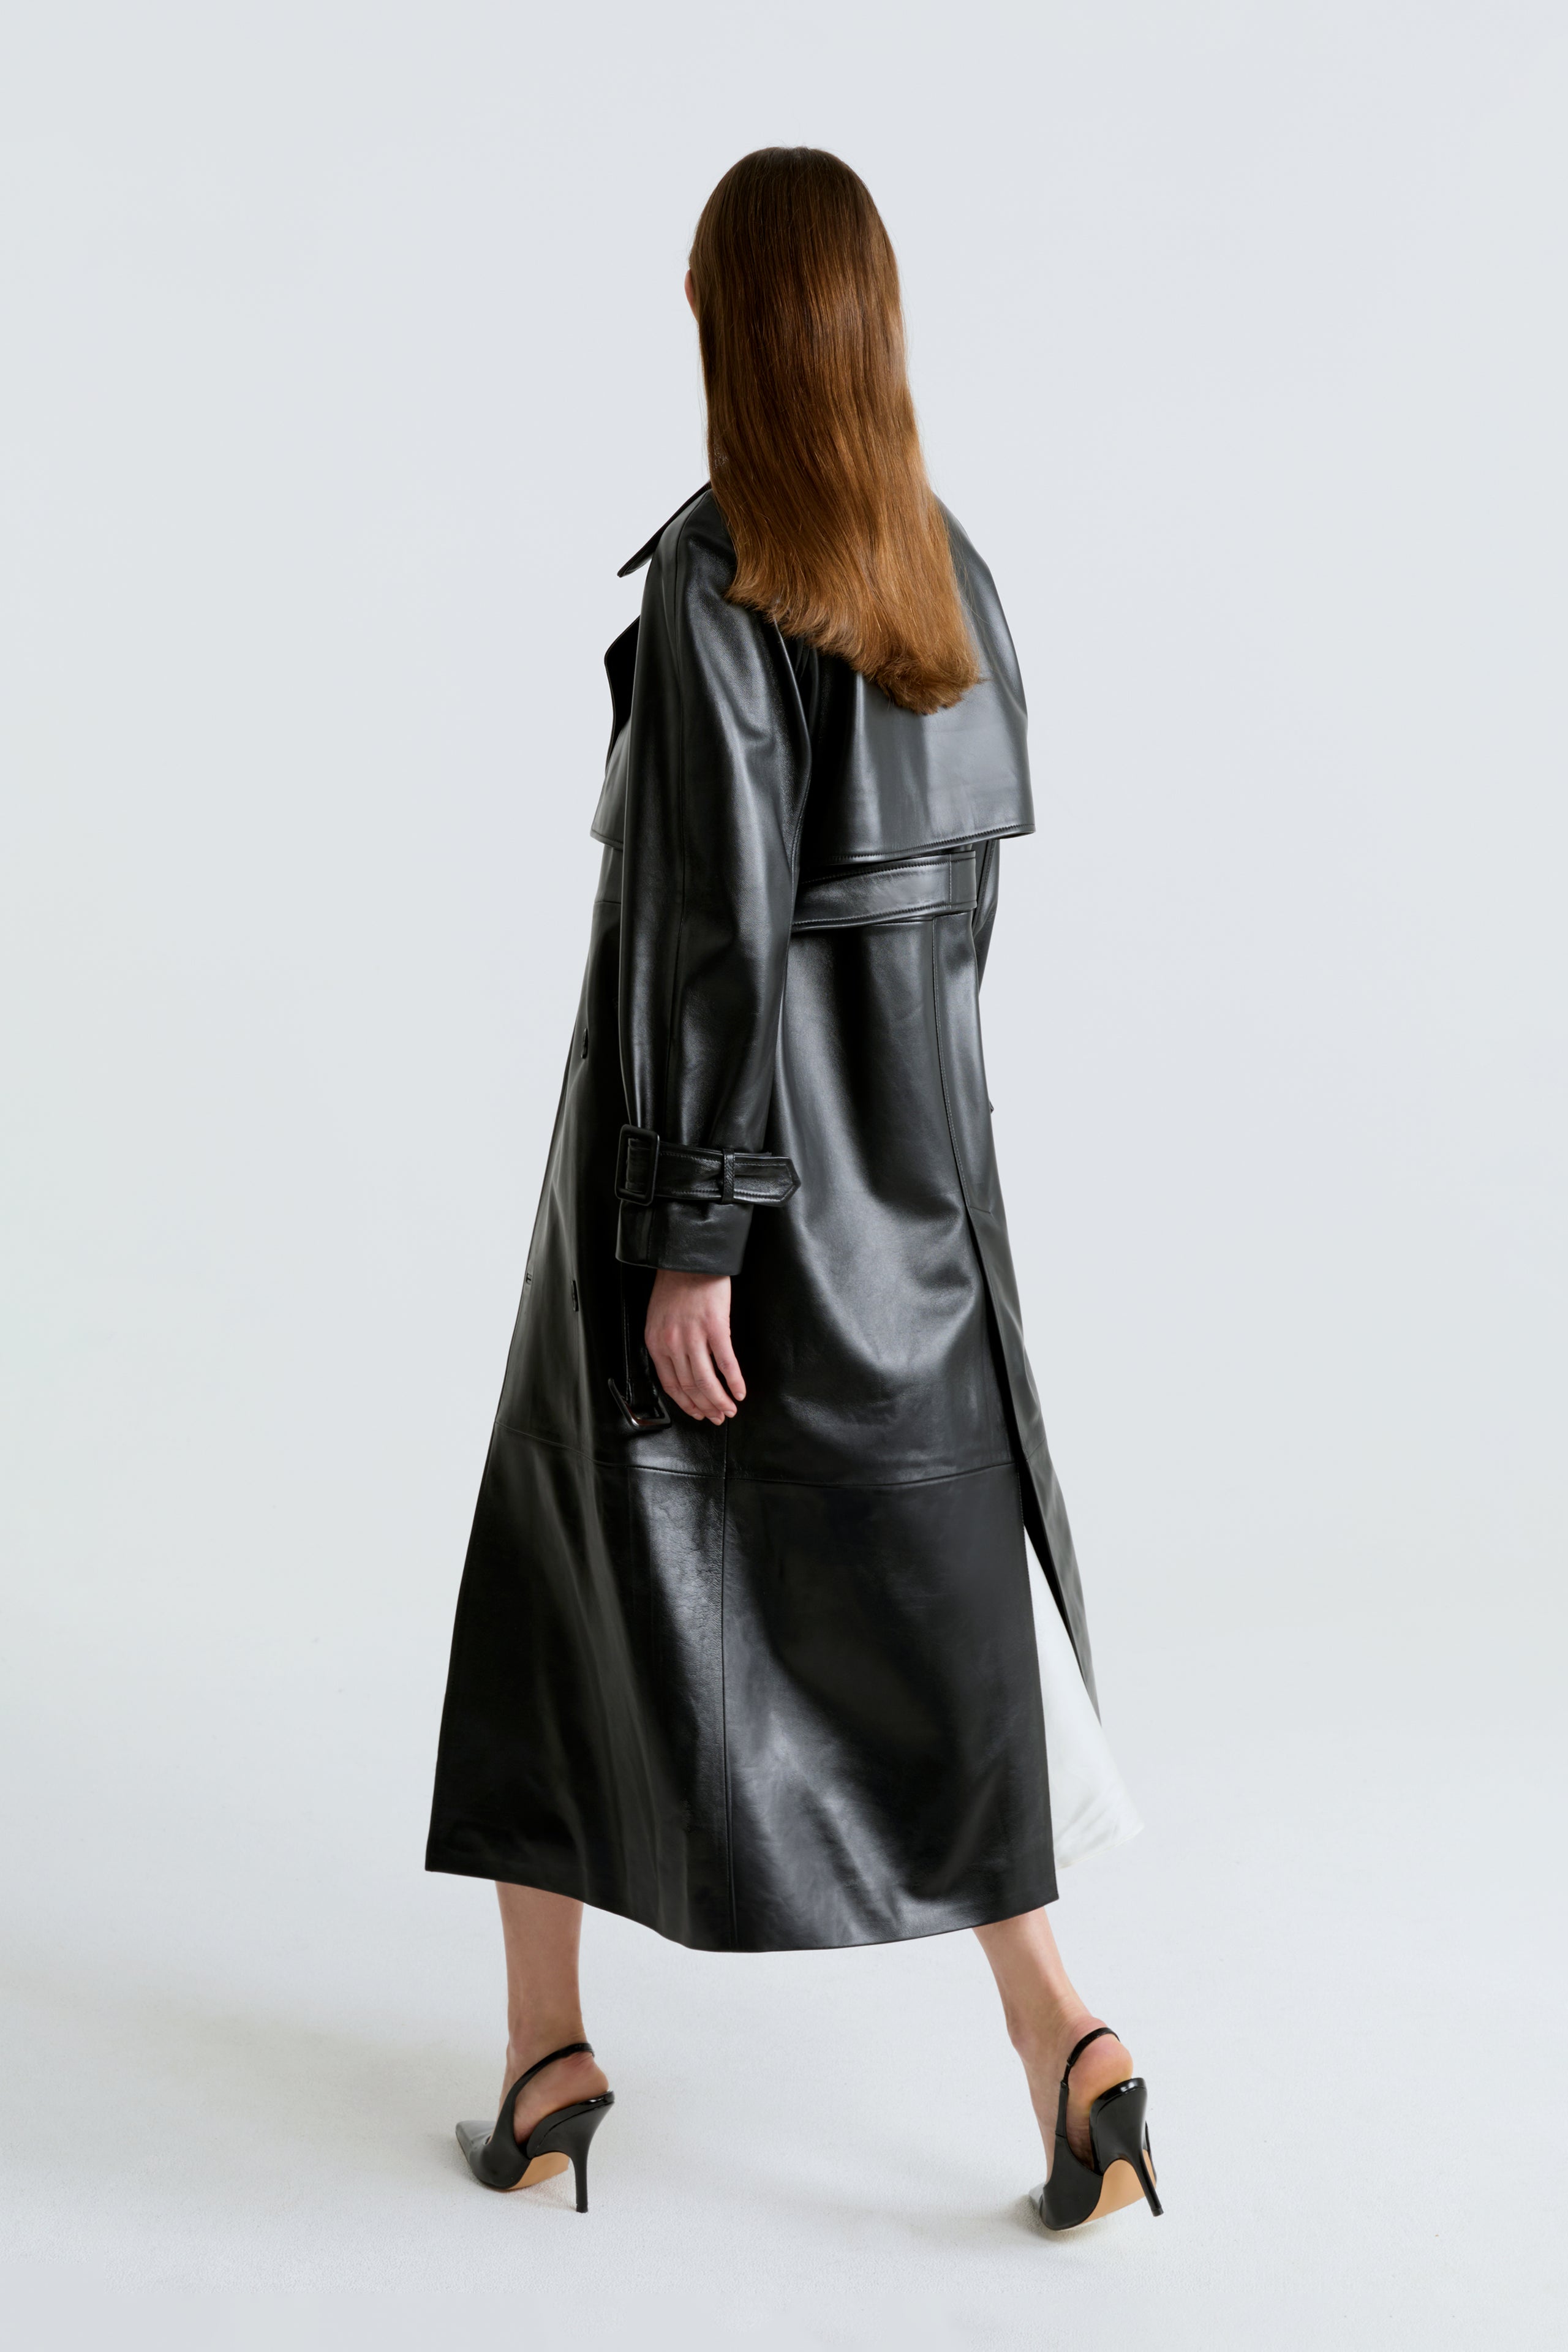 Model is wearing the Henri Black Oversized Leather Trench Back